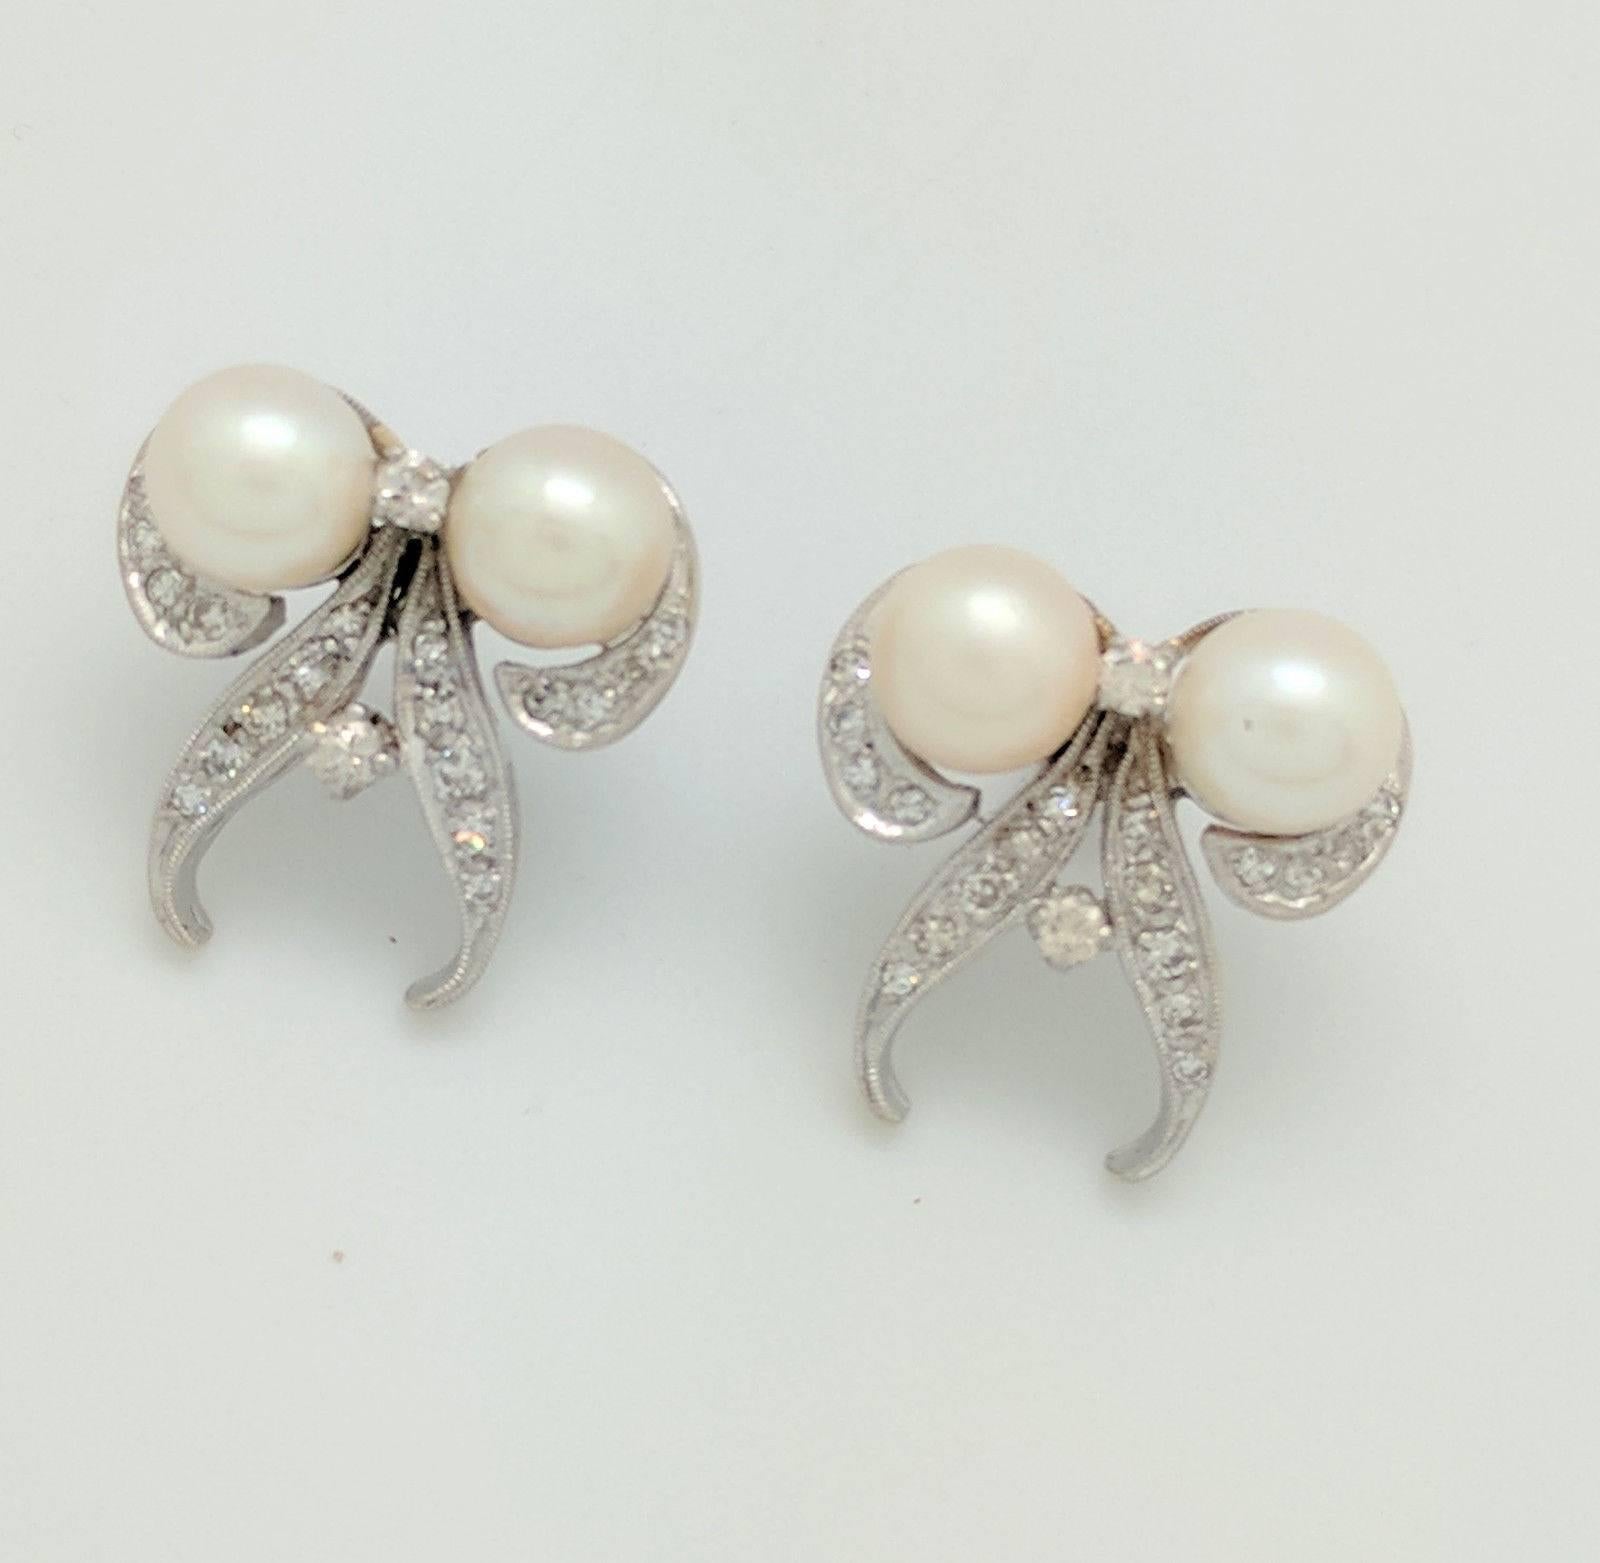 ESTATE 14K White Gold 7mm Pearl & Diamond Earrings

You are viewing a stunning pair of Estate Pearl & Diamond Earrings. These earrings are crafted from 14k white gold and weigh 7.8 grams. Each earring features (2) 7mm cultured pearls and (20)